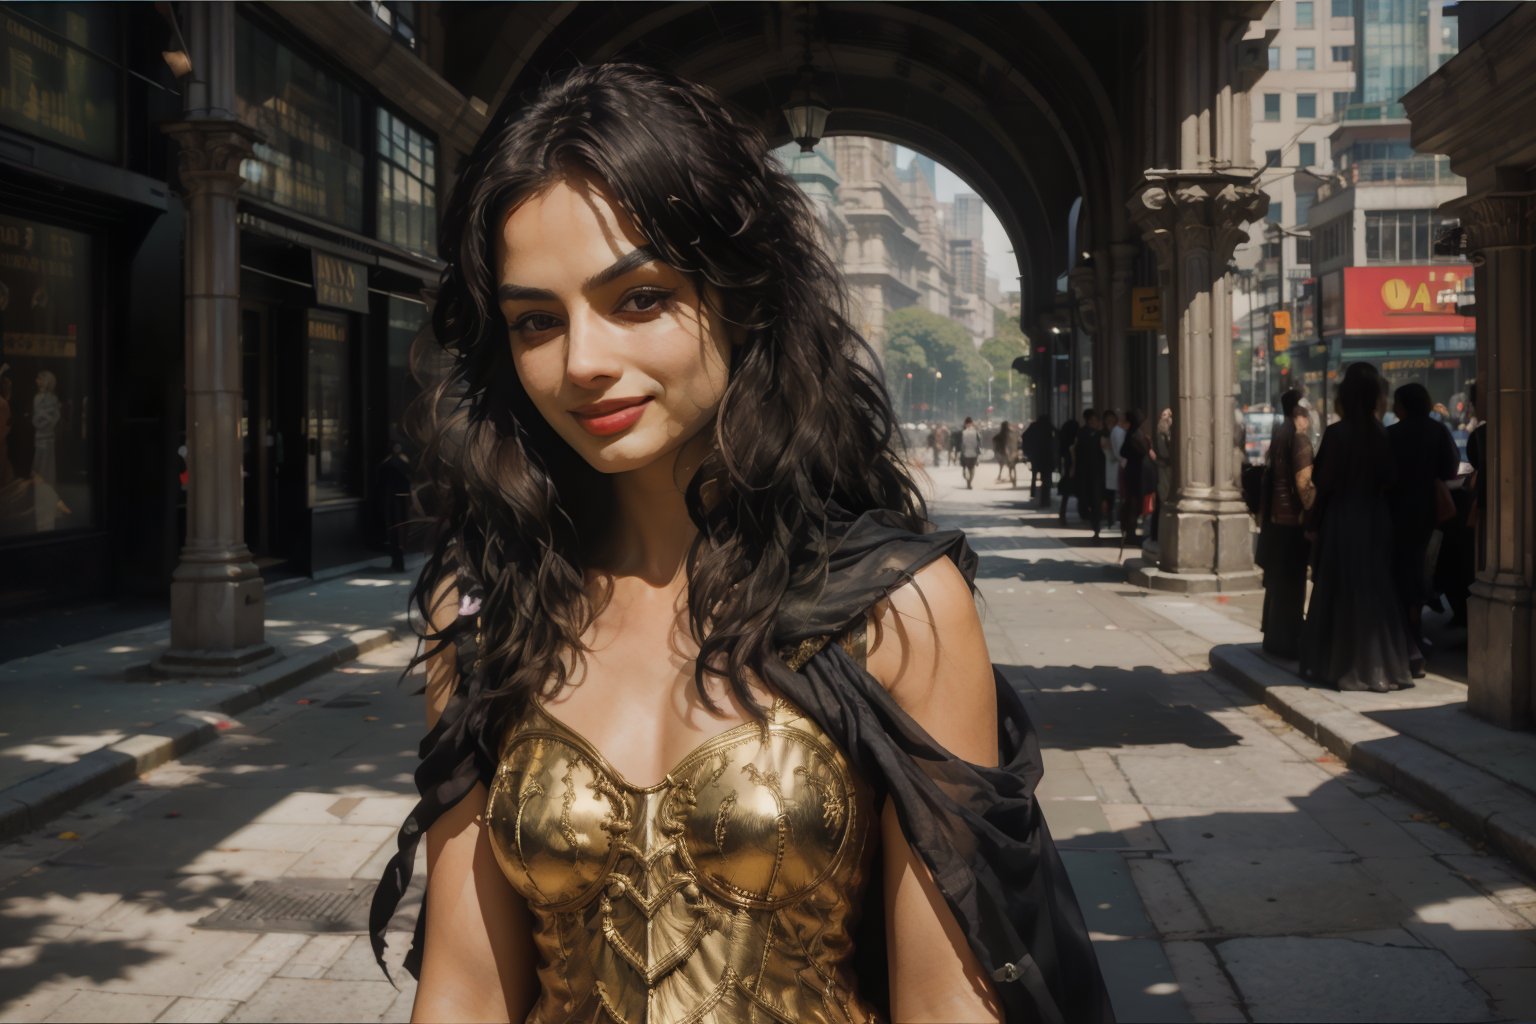 A stunning 18-year-old Indian teenager stands confidently in the heart of a vibrant city, her bright smile (1.1) radiating warmth as she poses effortlessly against the urban backdrop. Her full figure is meticulously rendered in ultra-high definition, with every detail visible from head to toe. The best lighting highlights her porcelain skin and dark hair, while subtle shadows add depth and dimensionality. In the midst of a bustling metropolis, she exudes poise and charm.